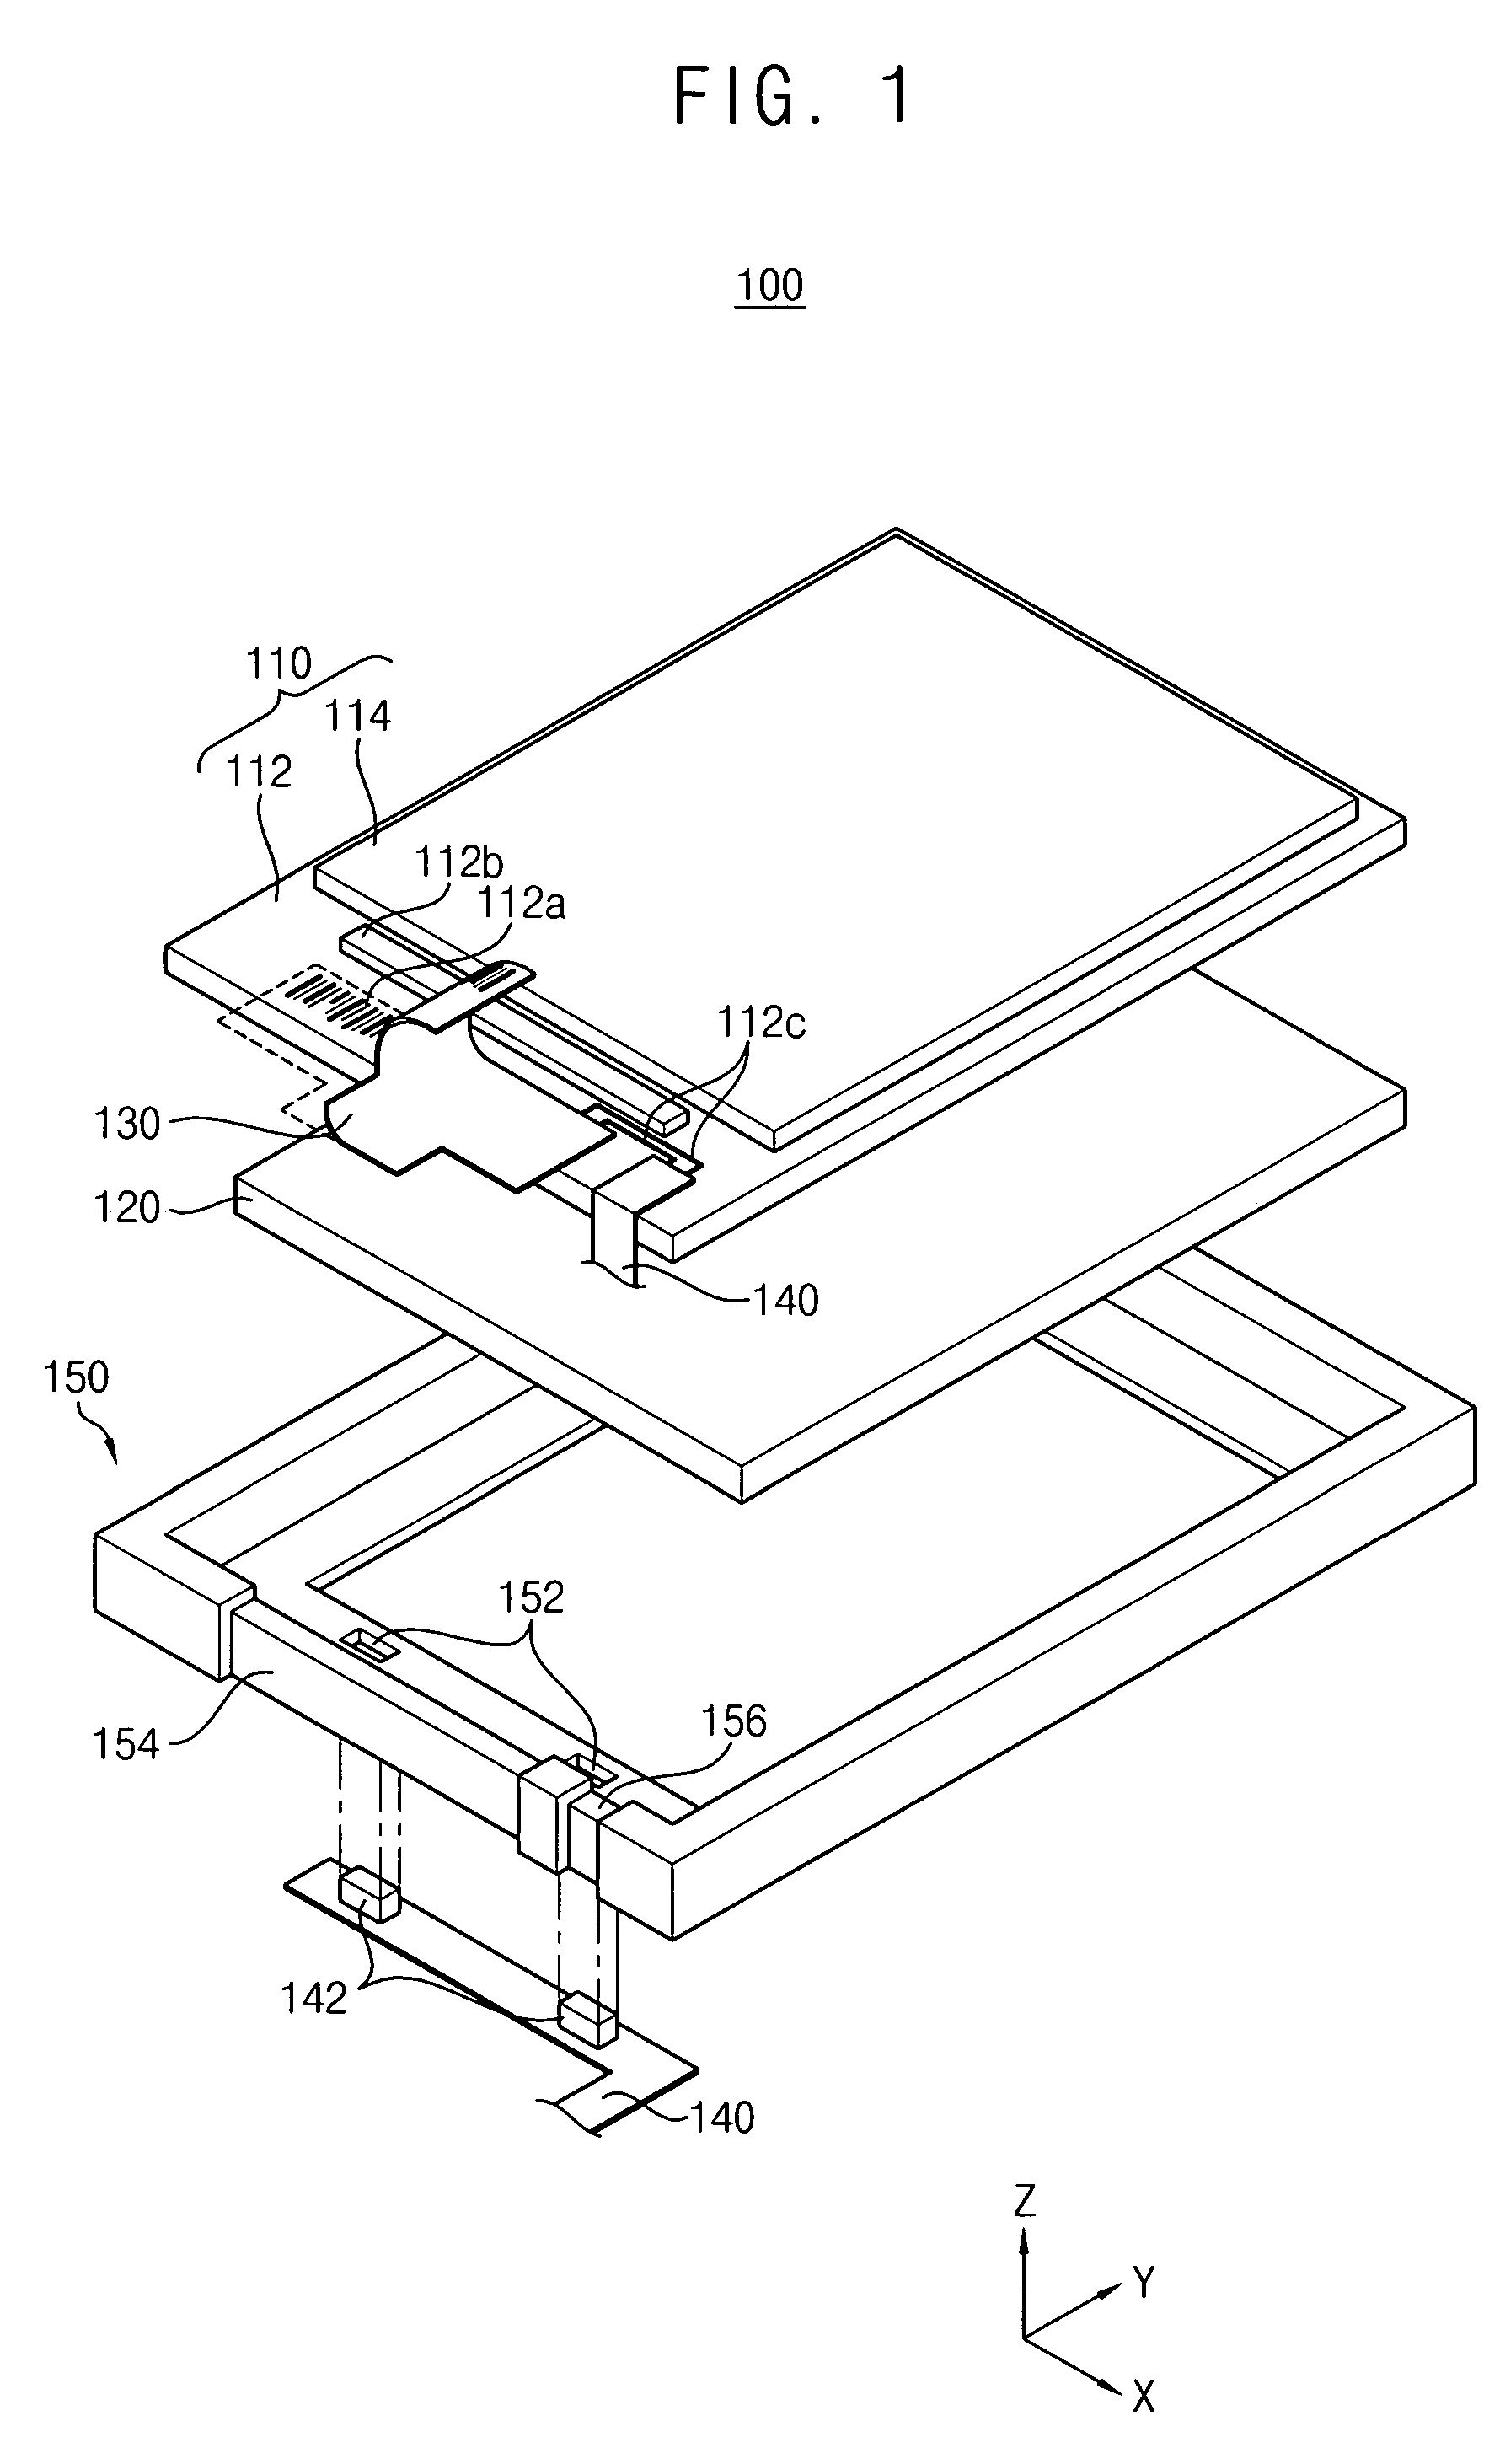 Display apparatus having a main and sub FPC and a receiving container which receives the main and sub FPC